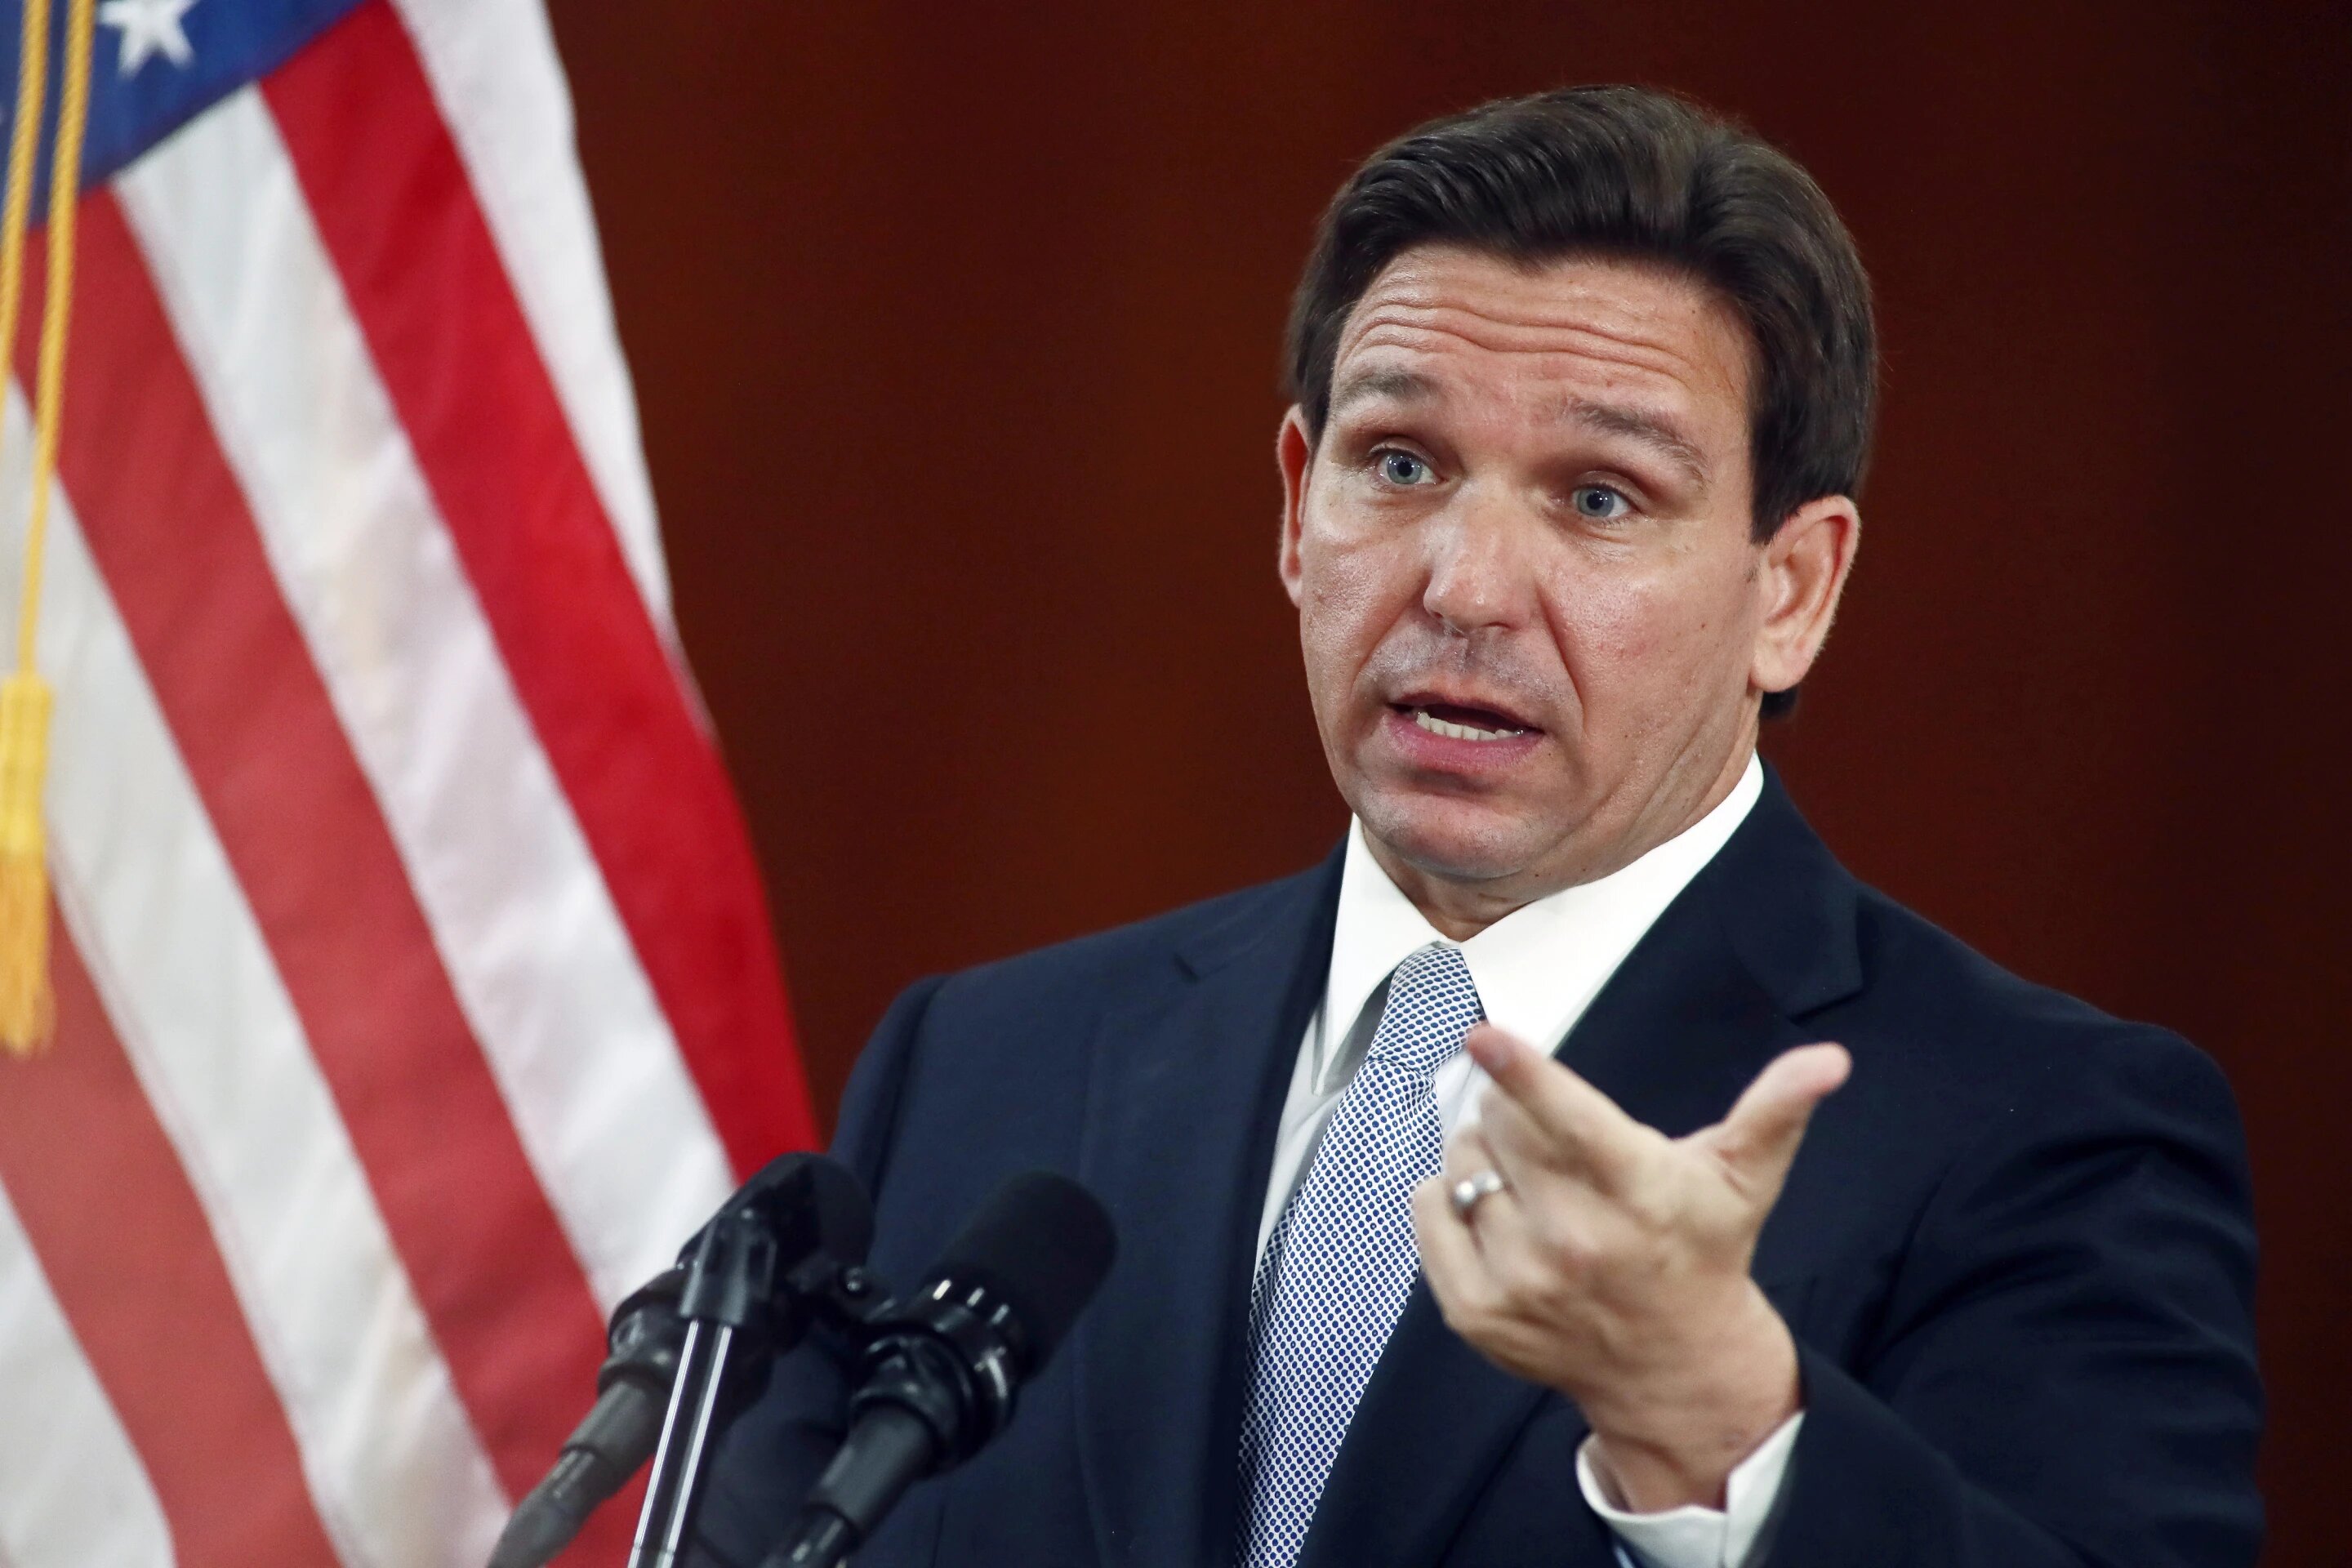 Florida Gov. Ron DeSantis answers questions from the media, March 7, 2023, at the state Capitol in Tallahassee, Fla.